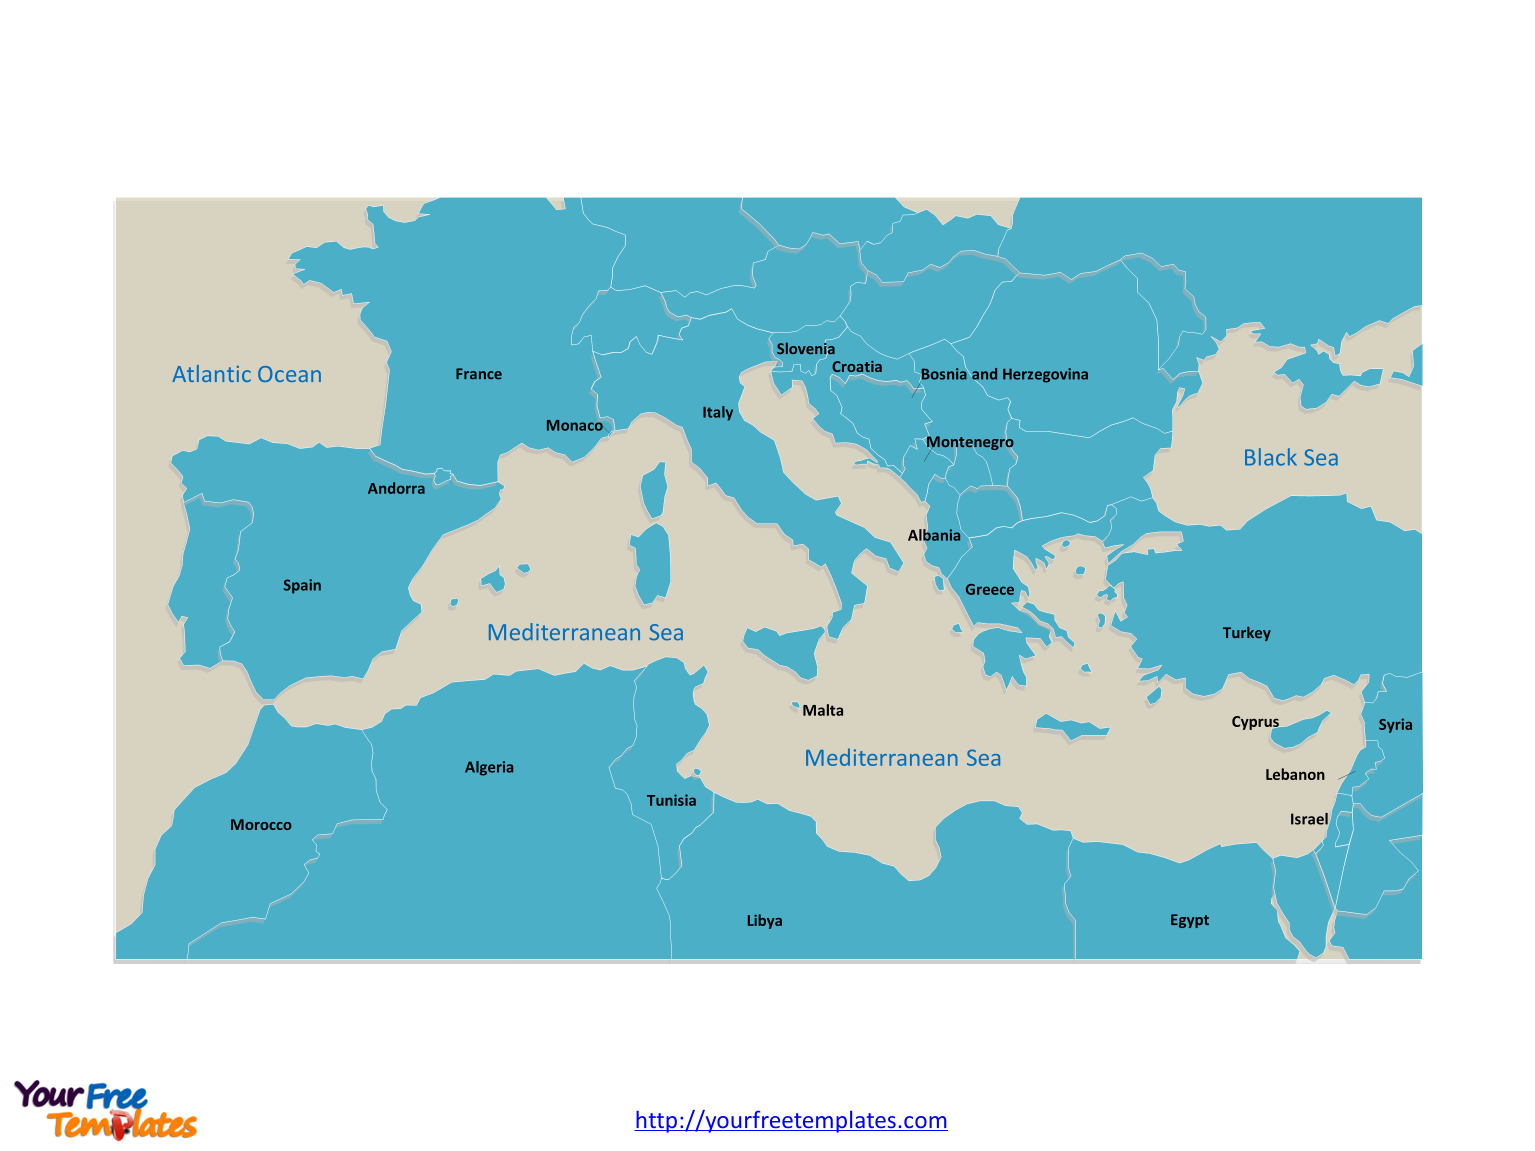 Mediterranean Sea Outline map labeled with country names